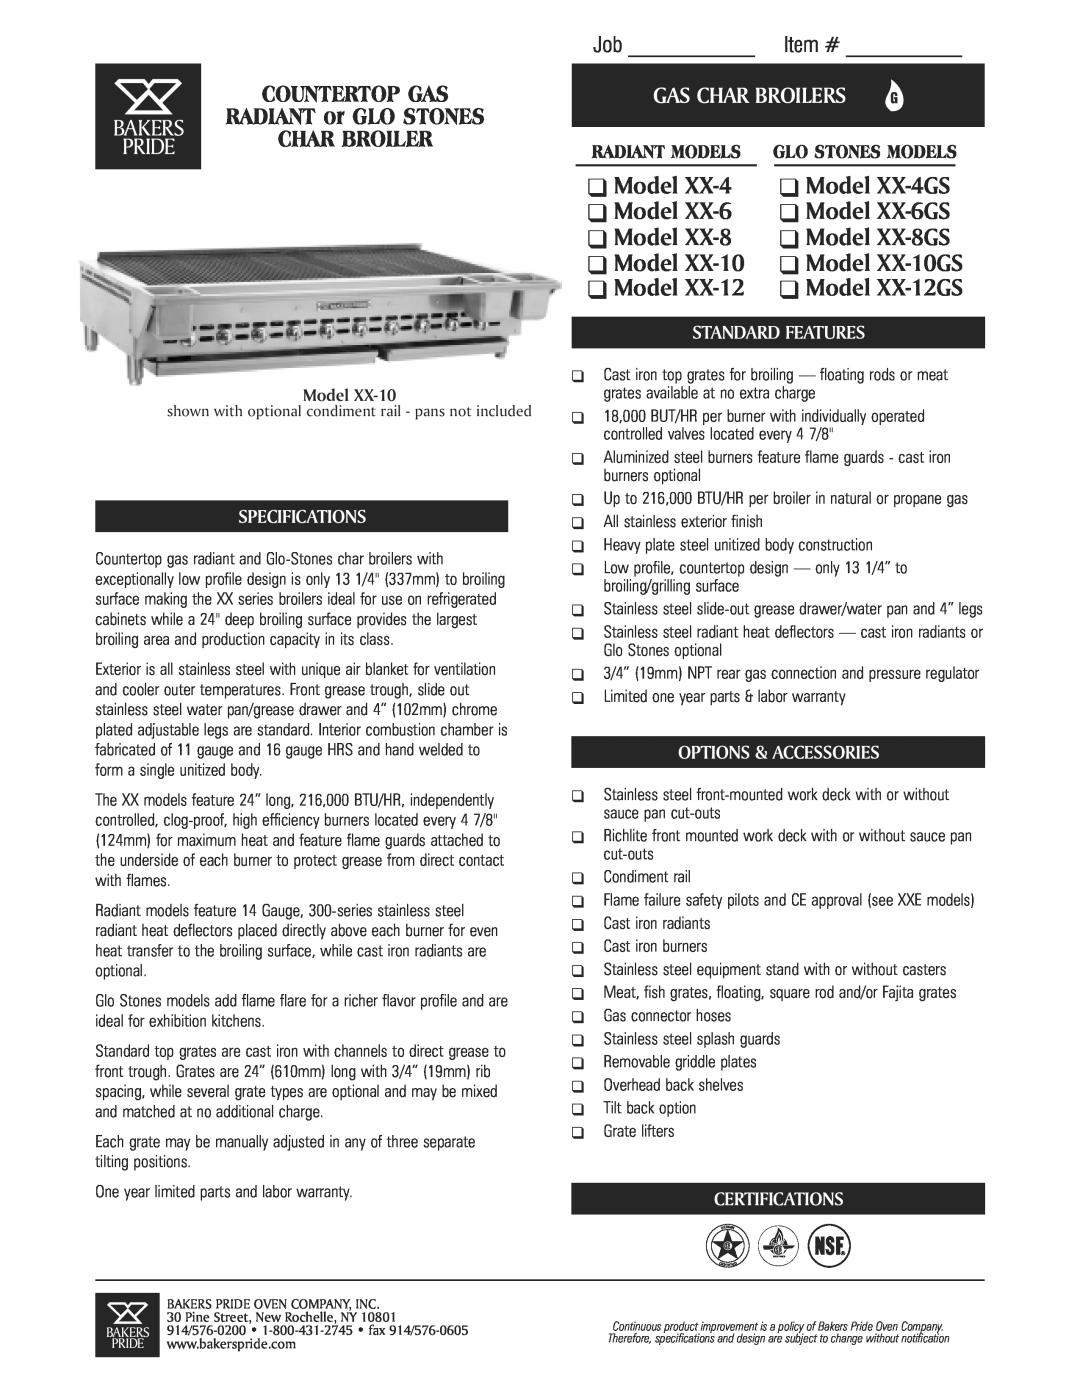 Bakers Pride Oven XX-10 specifications Job Item #, RADIANT or GLO STONES, Char Broiler, Model XX-8 Model XX-8GS, Bakers 